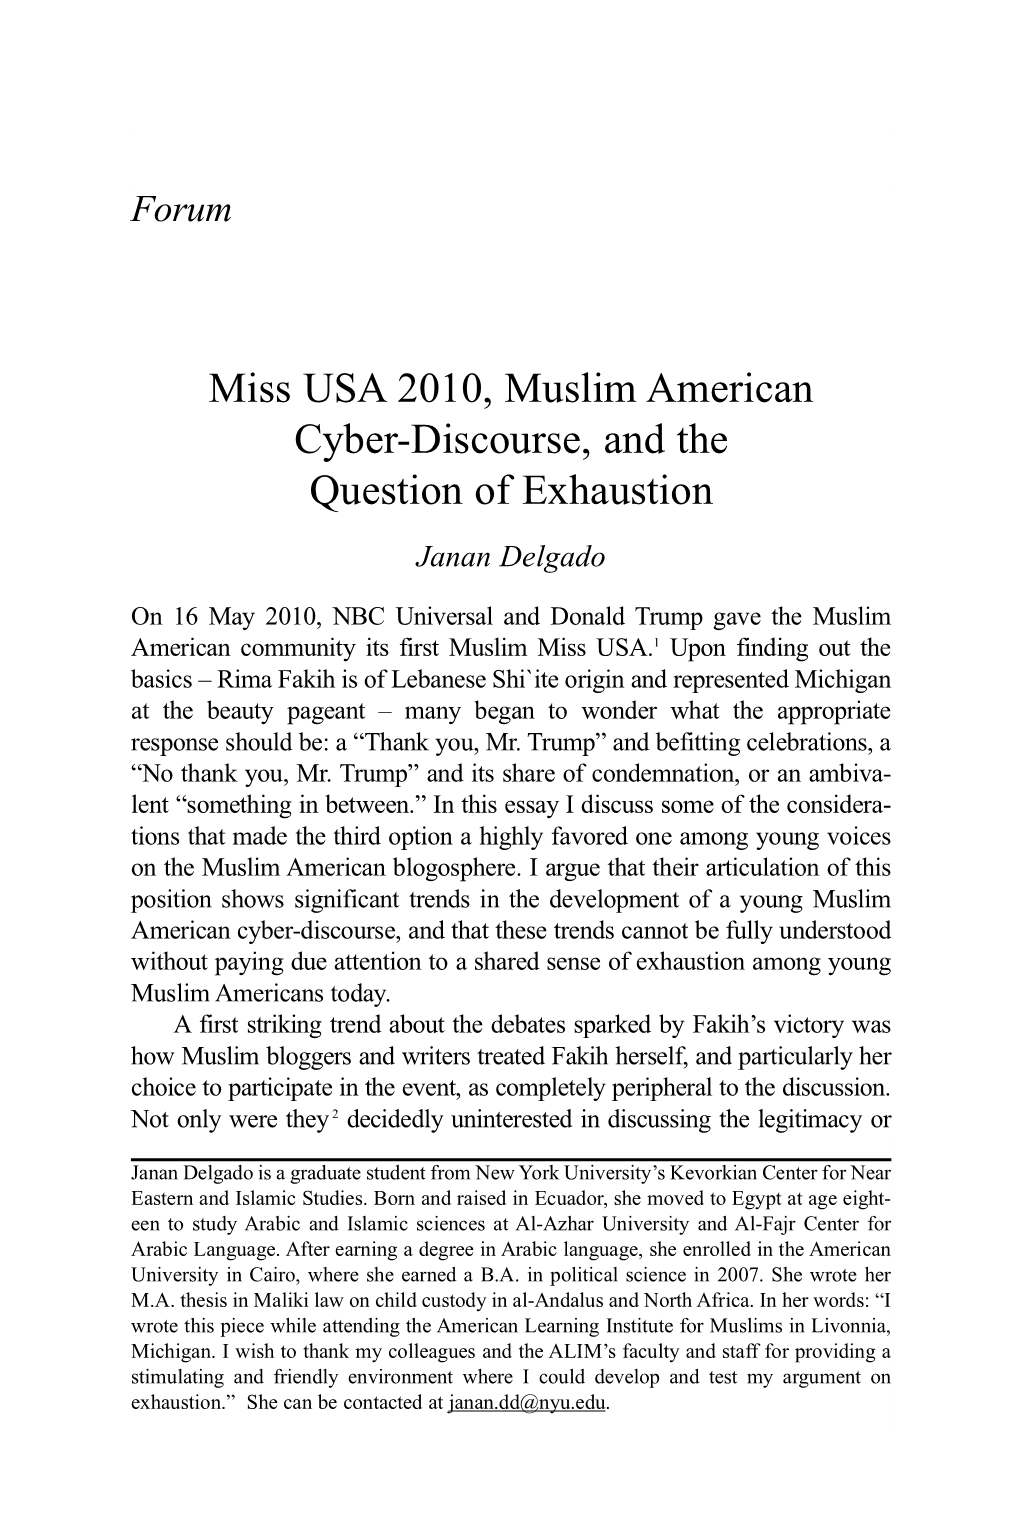 Miss USA 2010, Muslim American Cyber-Discourse, and the Question of Exhaustion Janan Delgado